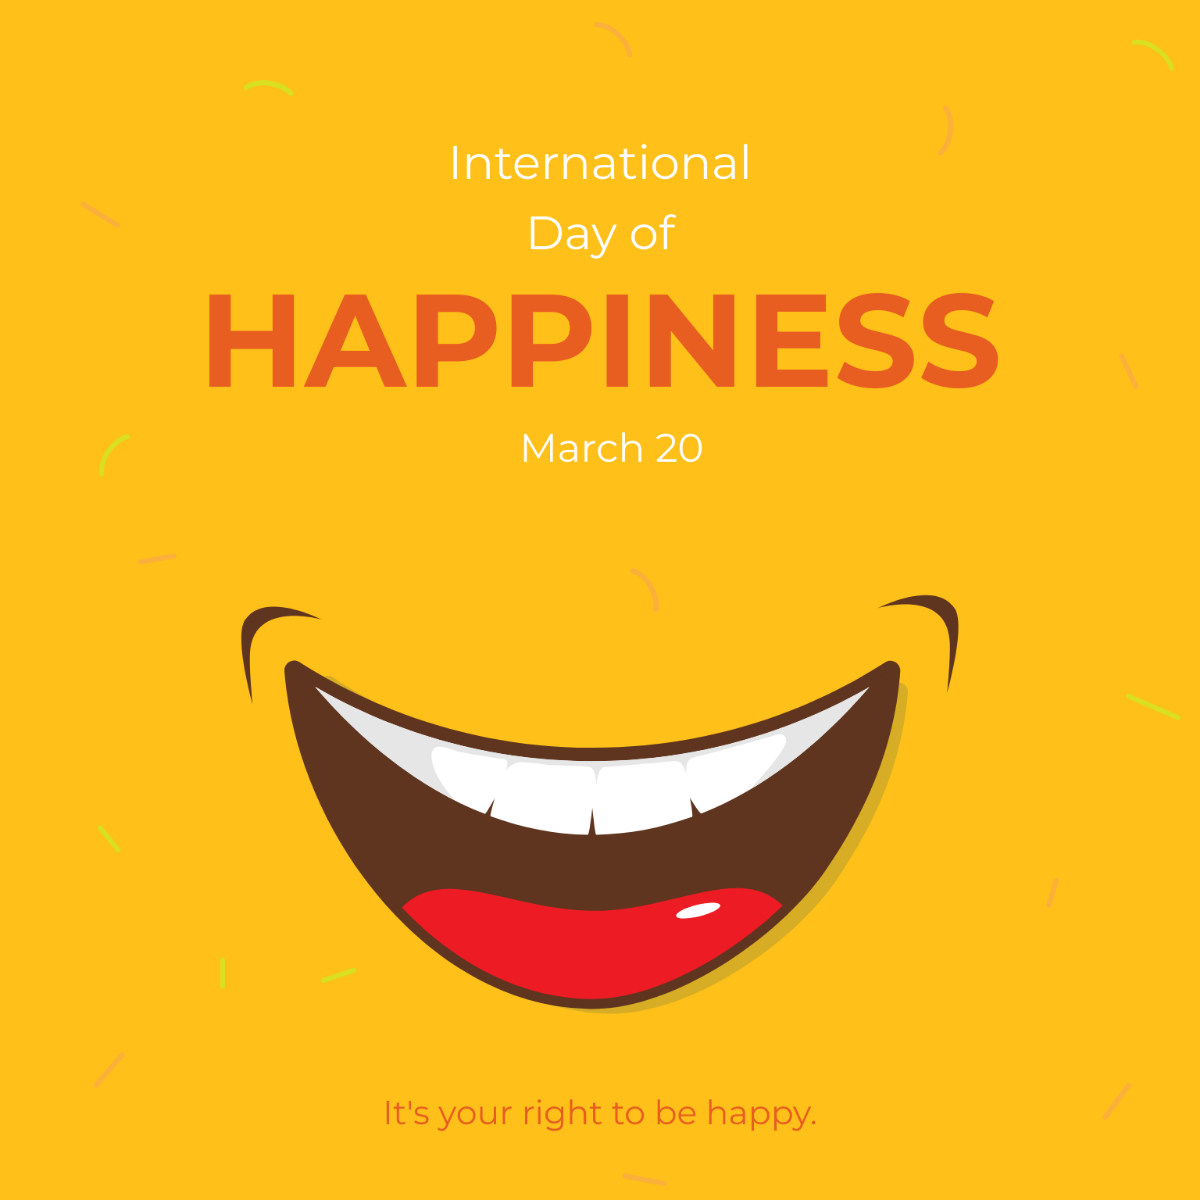 Free International Day of Happiness Flyer Vector Template